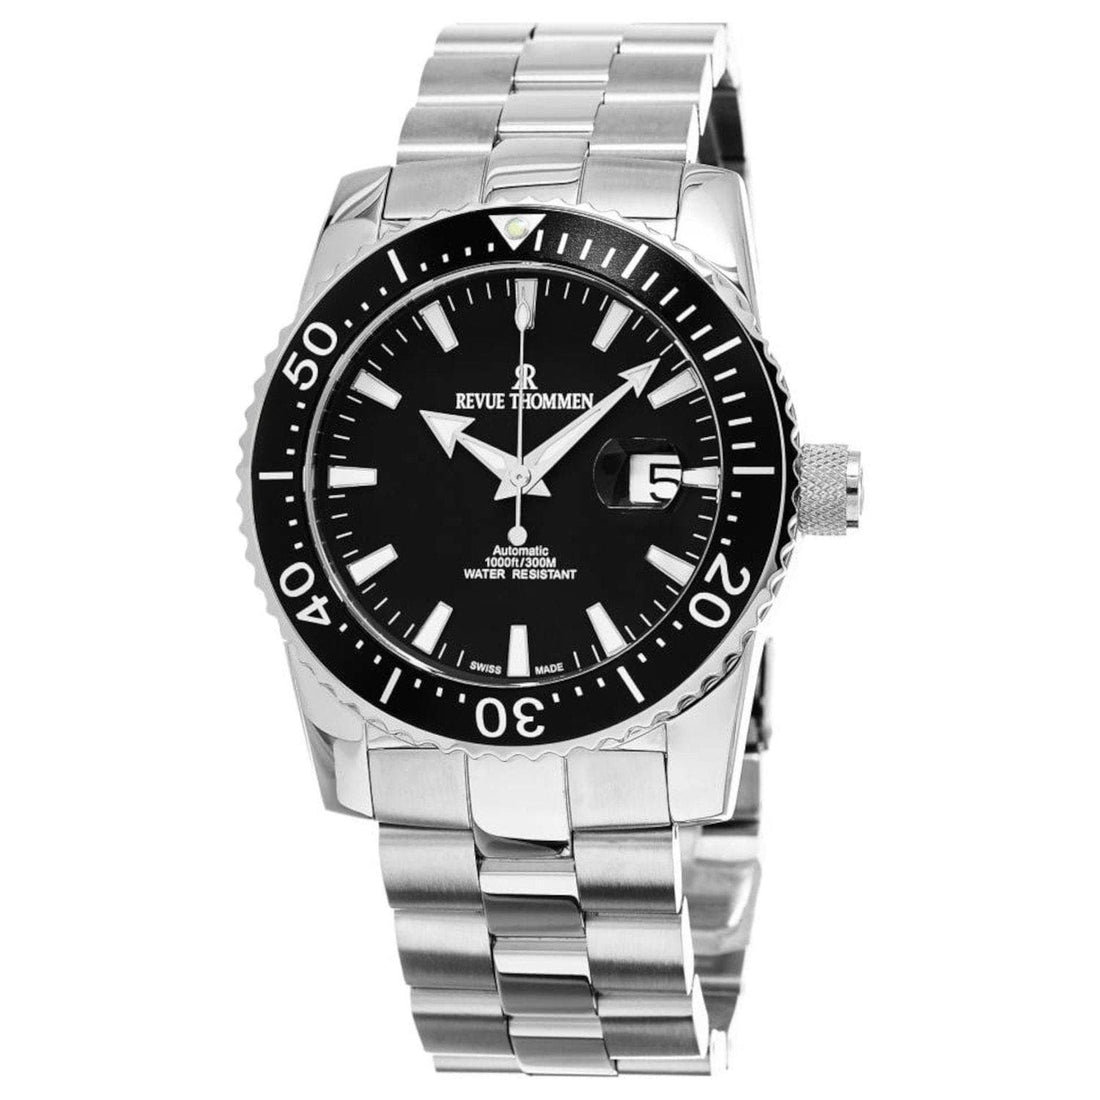 Revue Thommen 17030.2137 Men's 'Diver' Black Dial Stainless Steel Swiss Automatic Watch